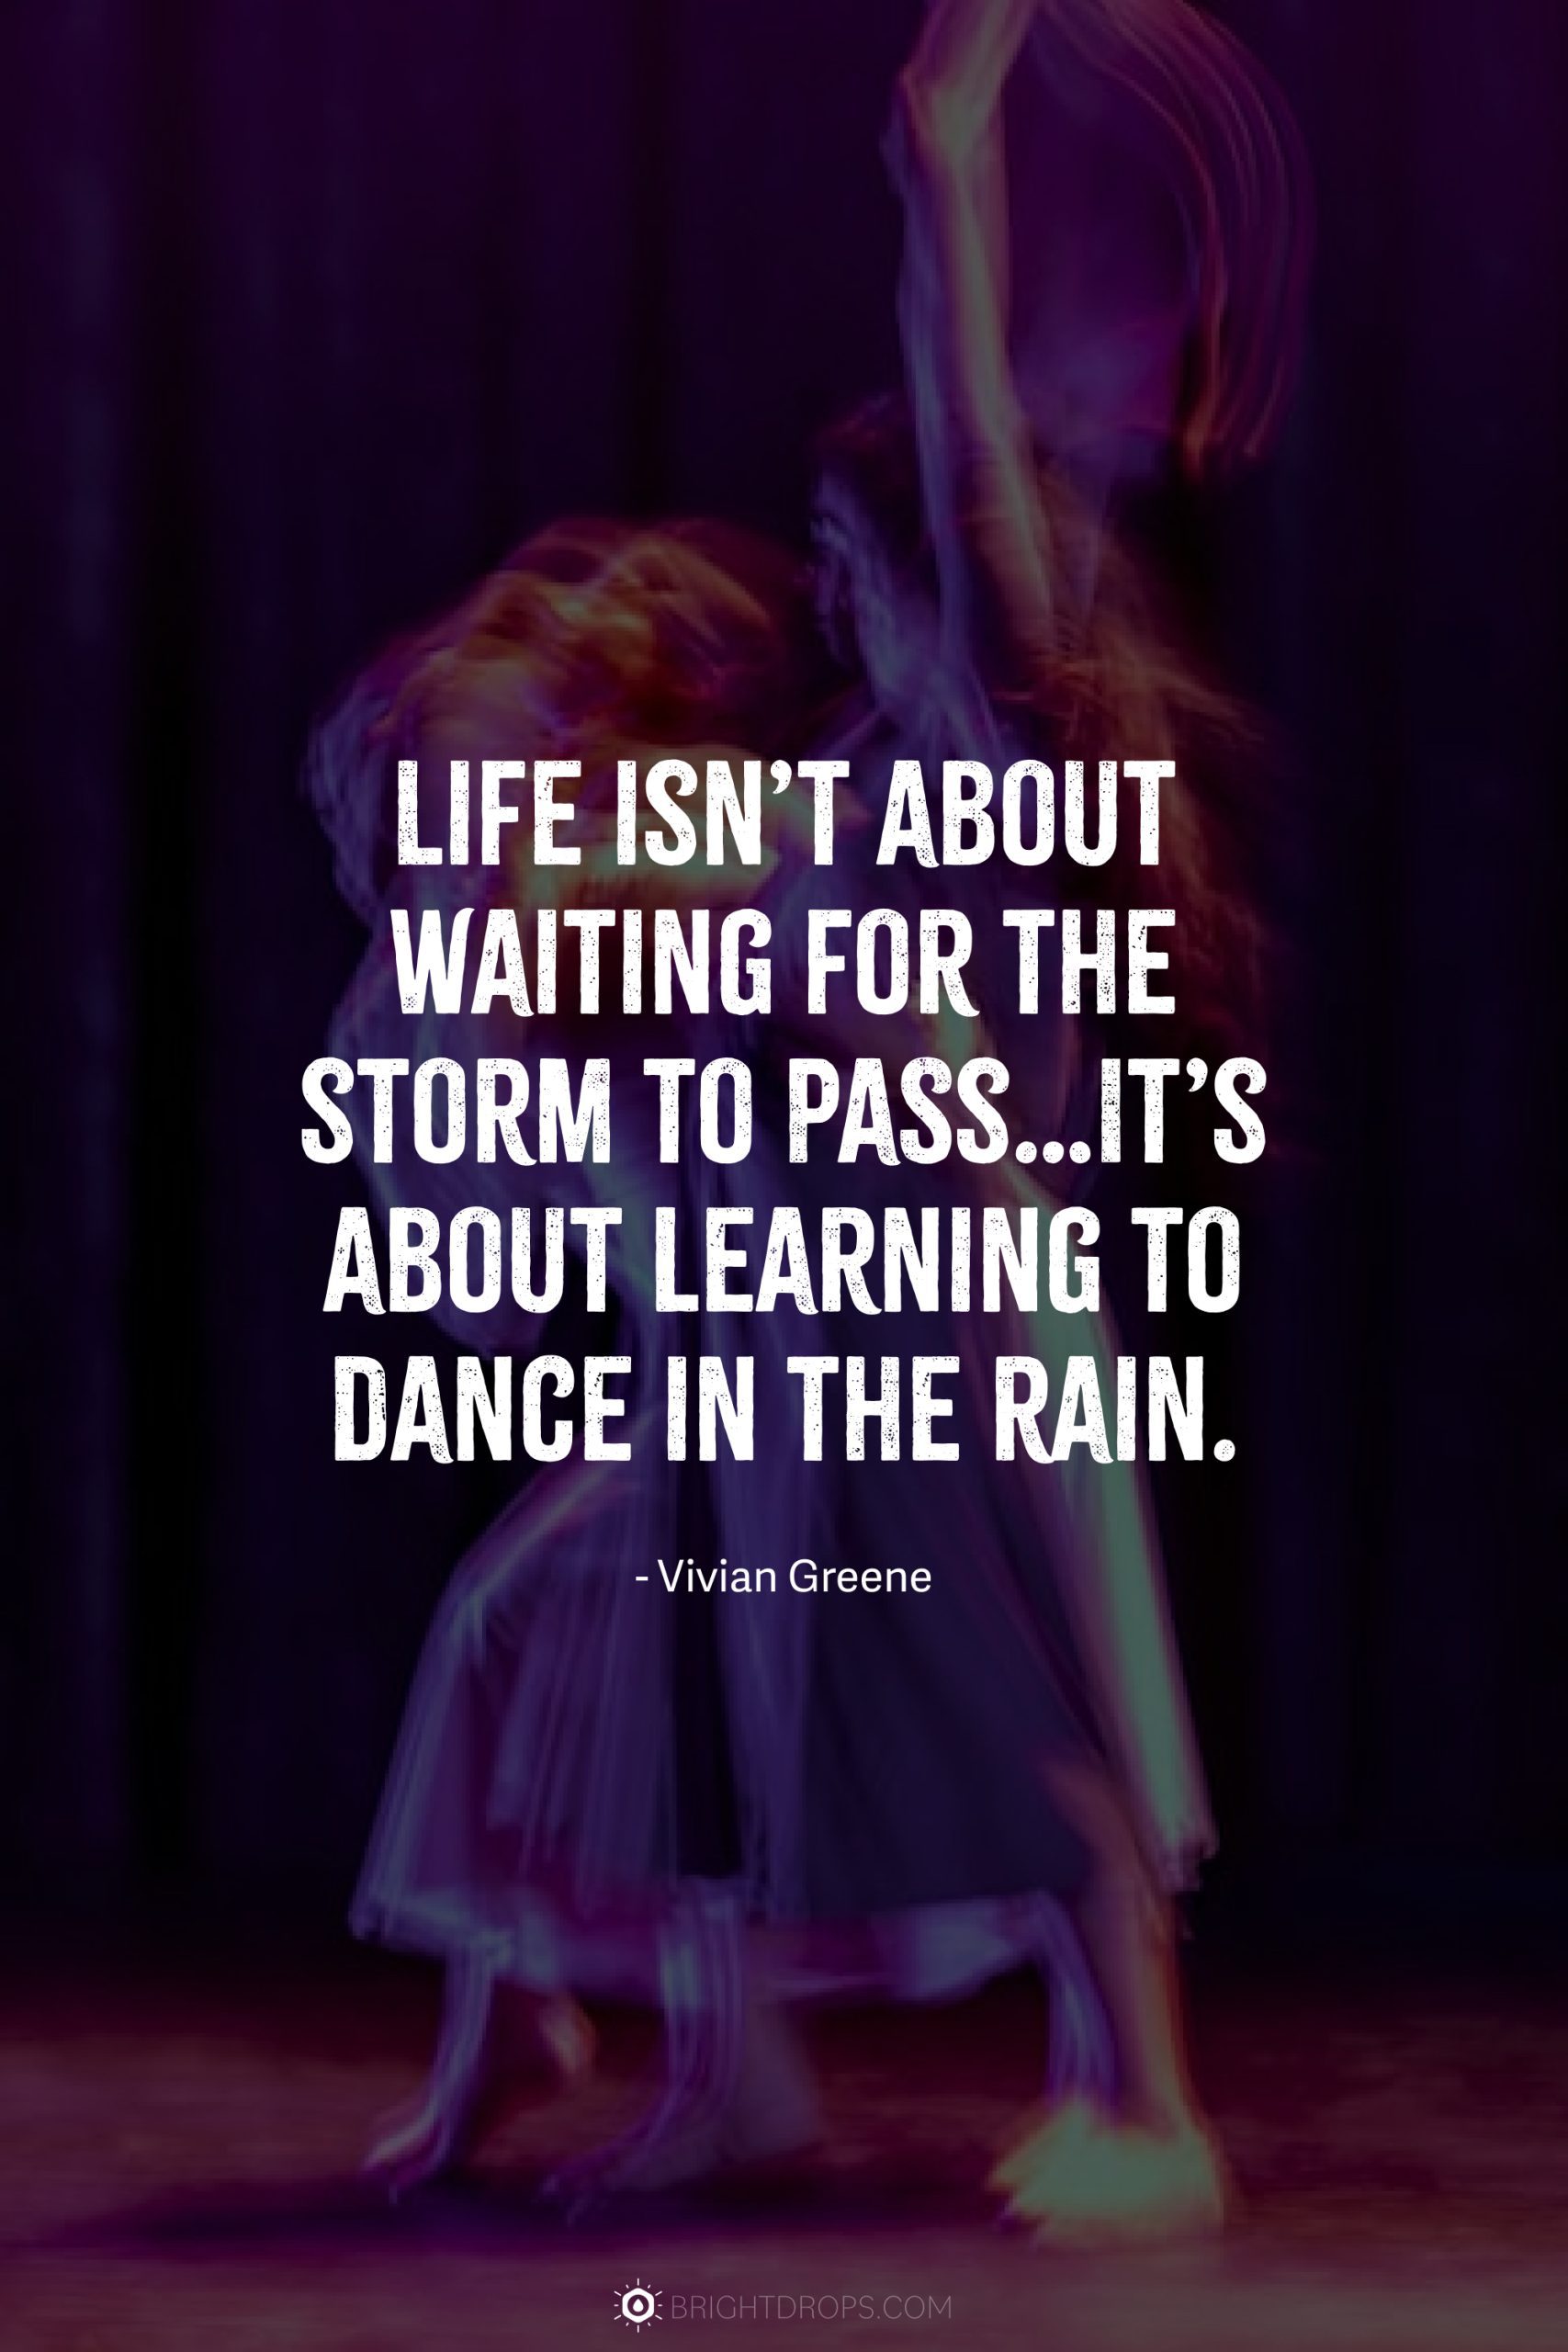 Life isn’t about waiting for the storm to pass…It’s about learning to dance in the rain.